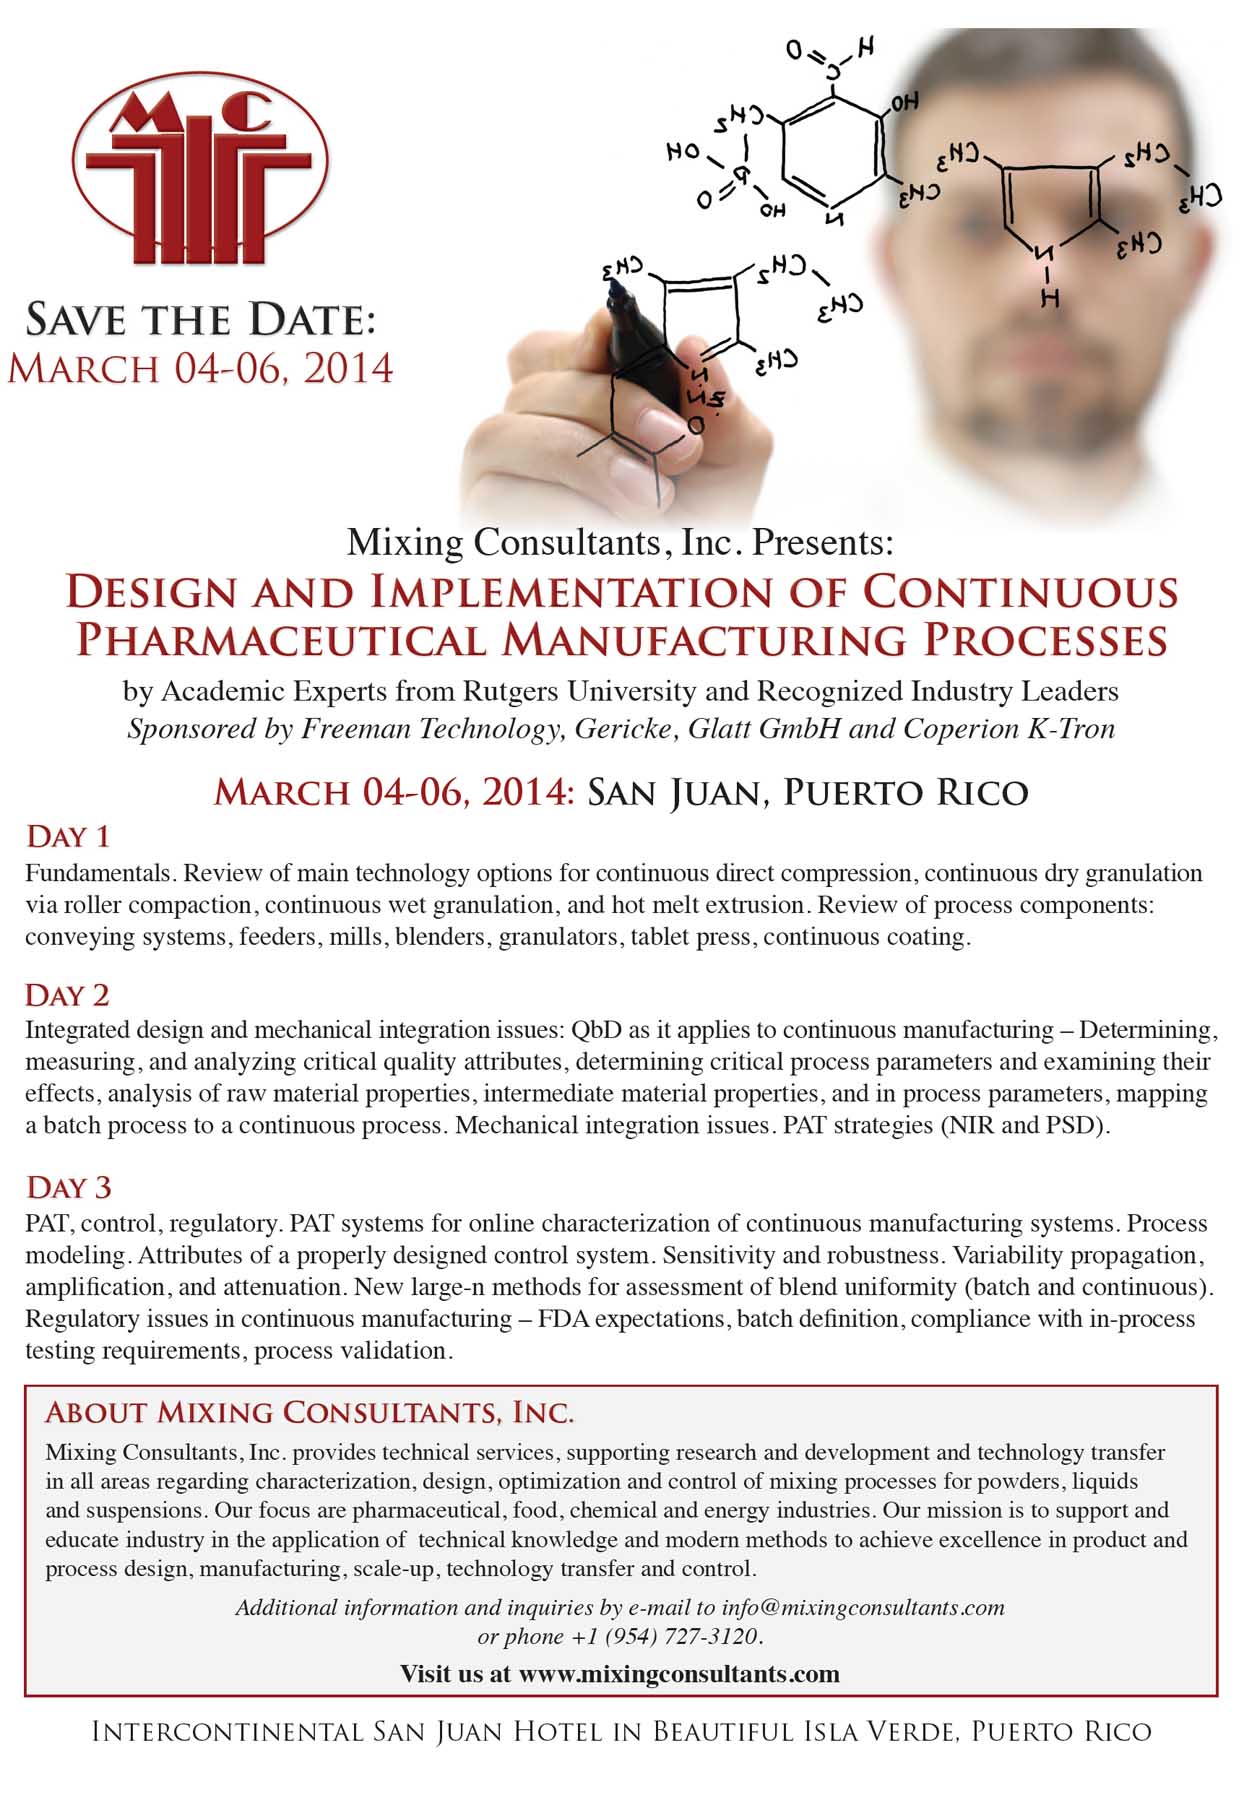 Design and implementation of continuous pharmaceutical manufacturing processes course